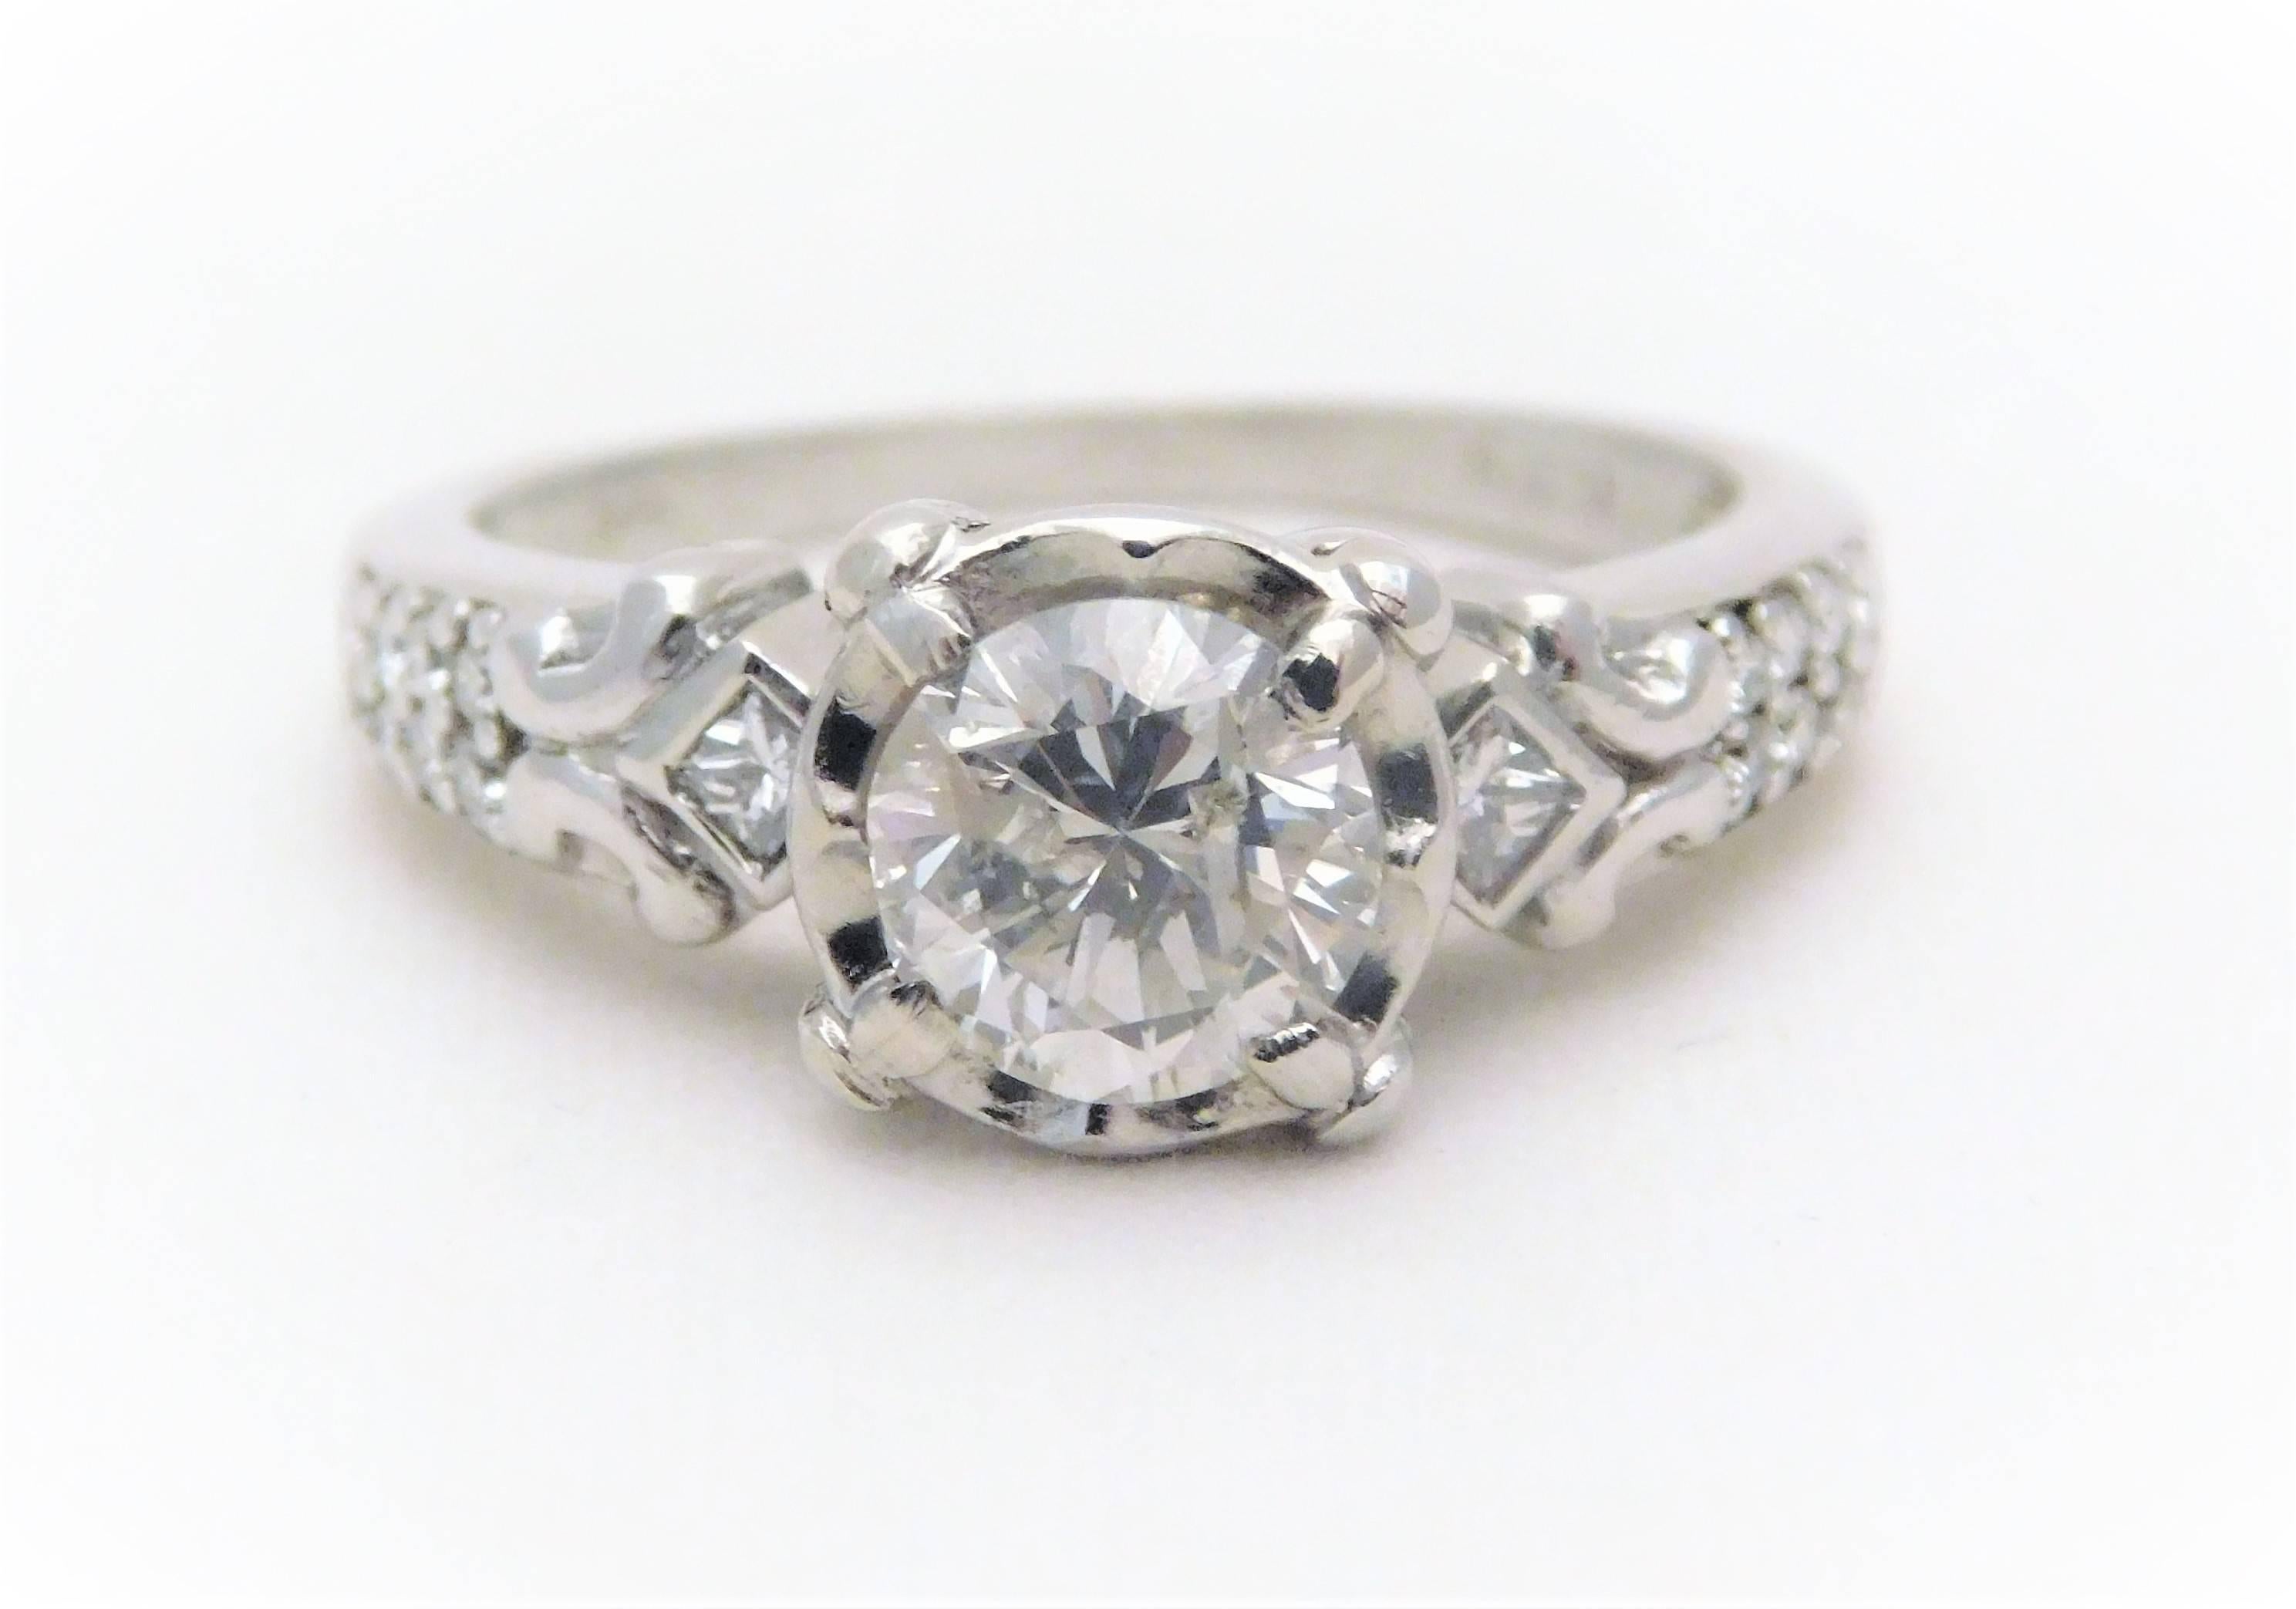 Vintage 14k White Gold Diamond Engagement Ring

From an exquisite New Orleans estate.  This amazing engagement-style ring has been crafted in solid 14k white gold.  It has been masterfully jeweled in a four-prong head with a beautiful Round